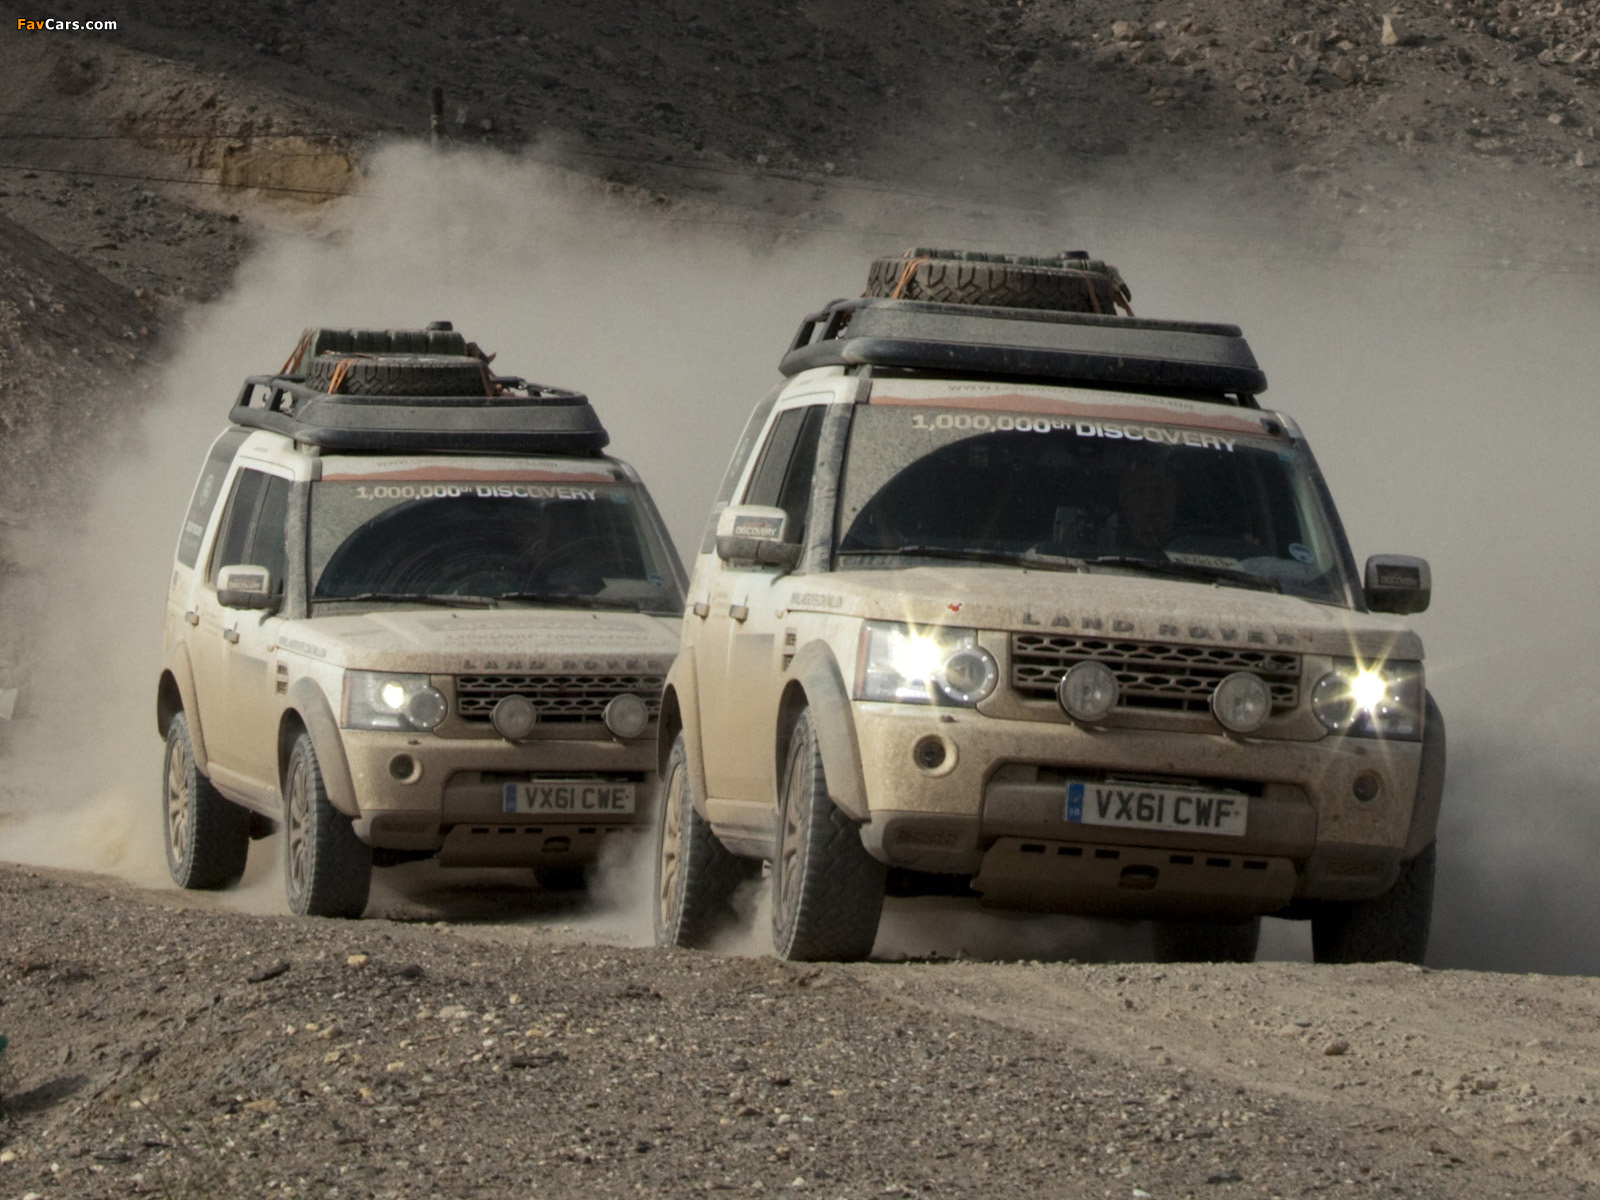 Land Rover Discovery 4 Expedition Vehicle 2012 photos (1600 x 1200)